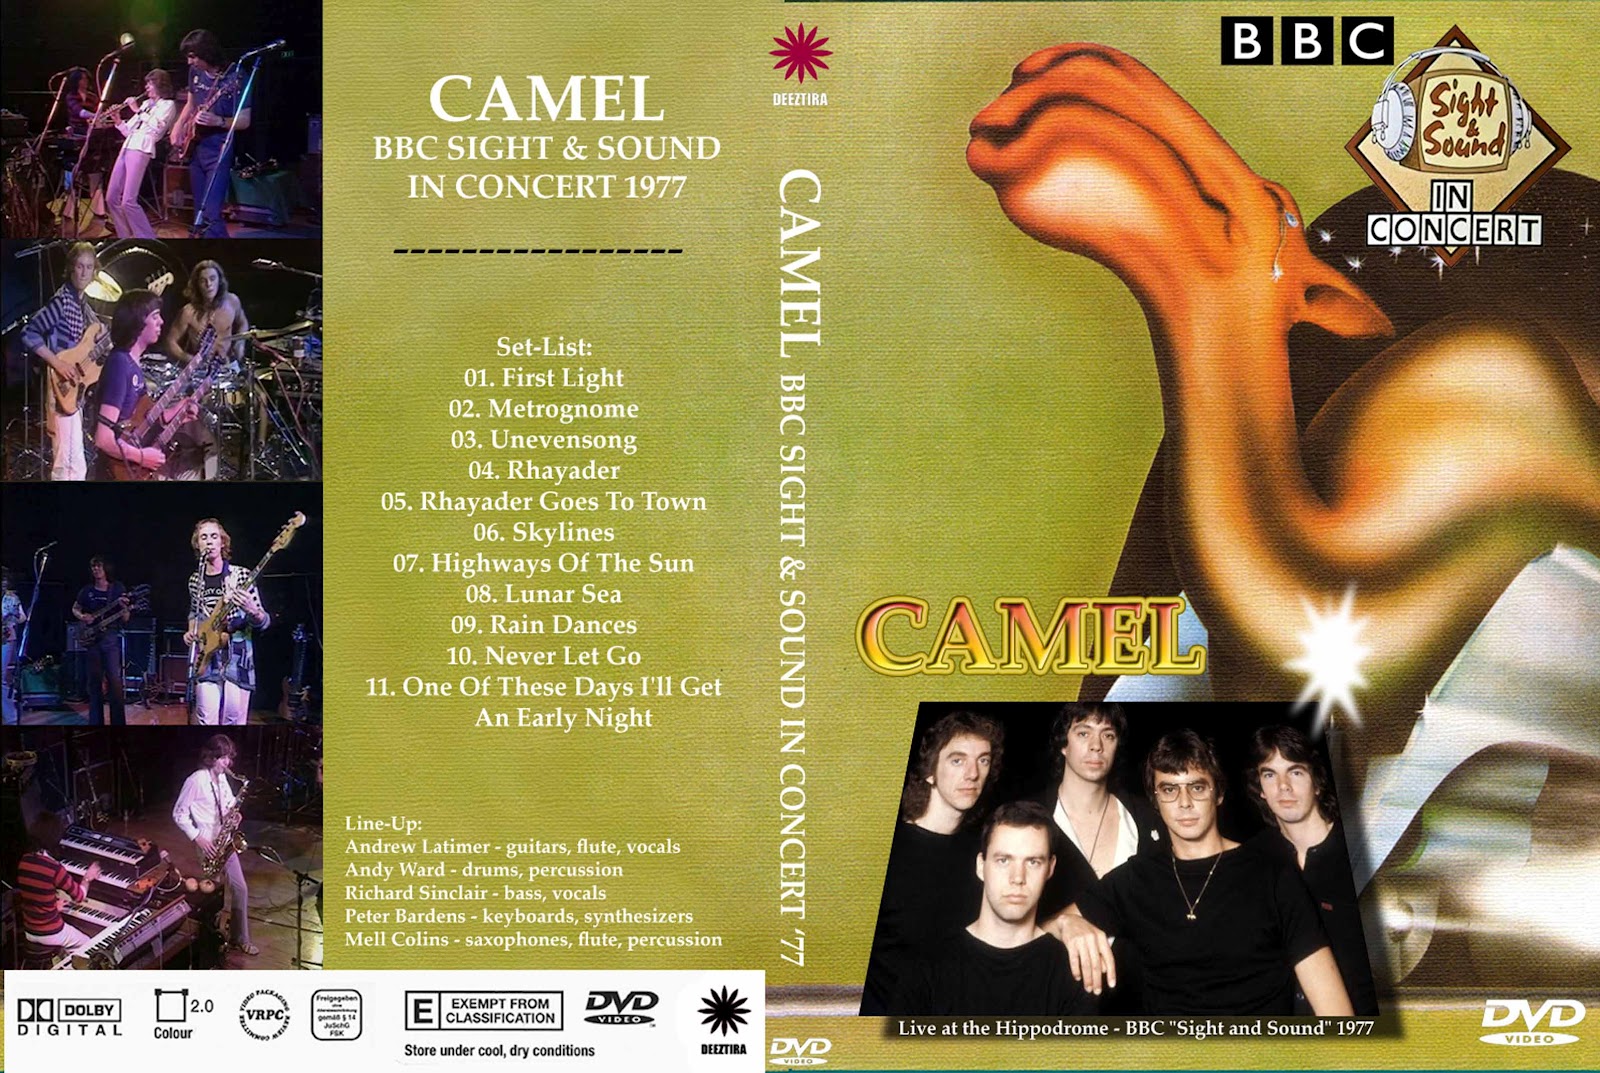 YOUDISCOLL: Camel - BBC Sight and Sound Concert 1977